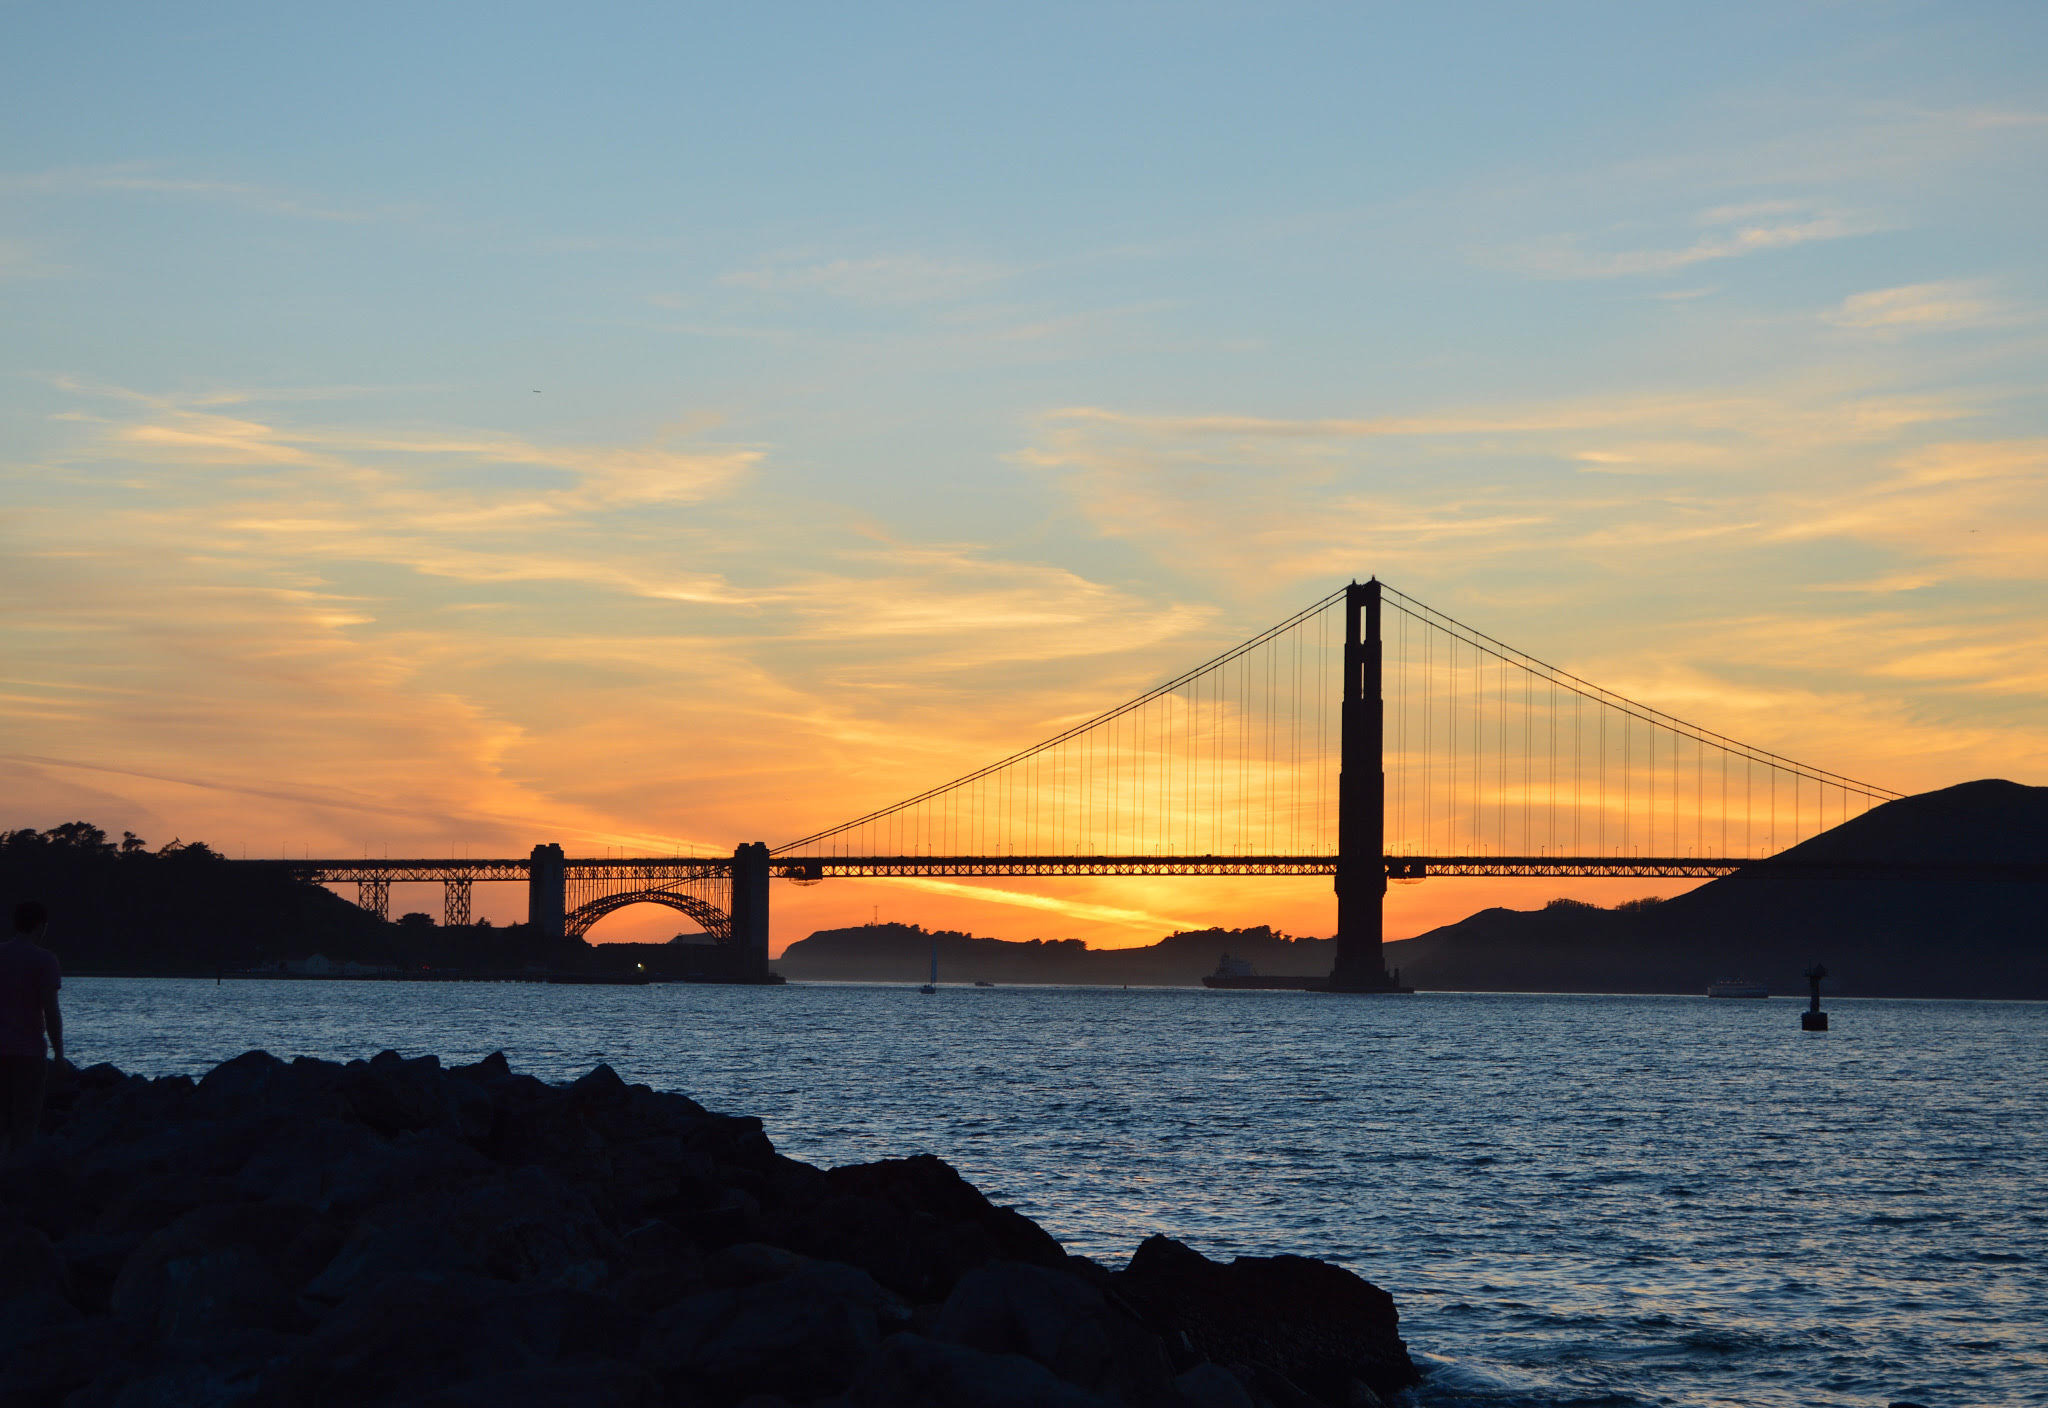 crissy field at sunset